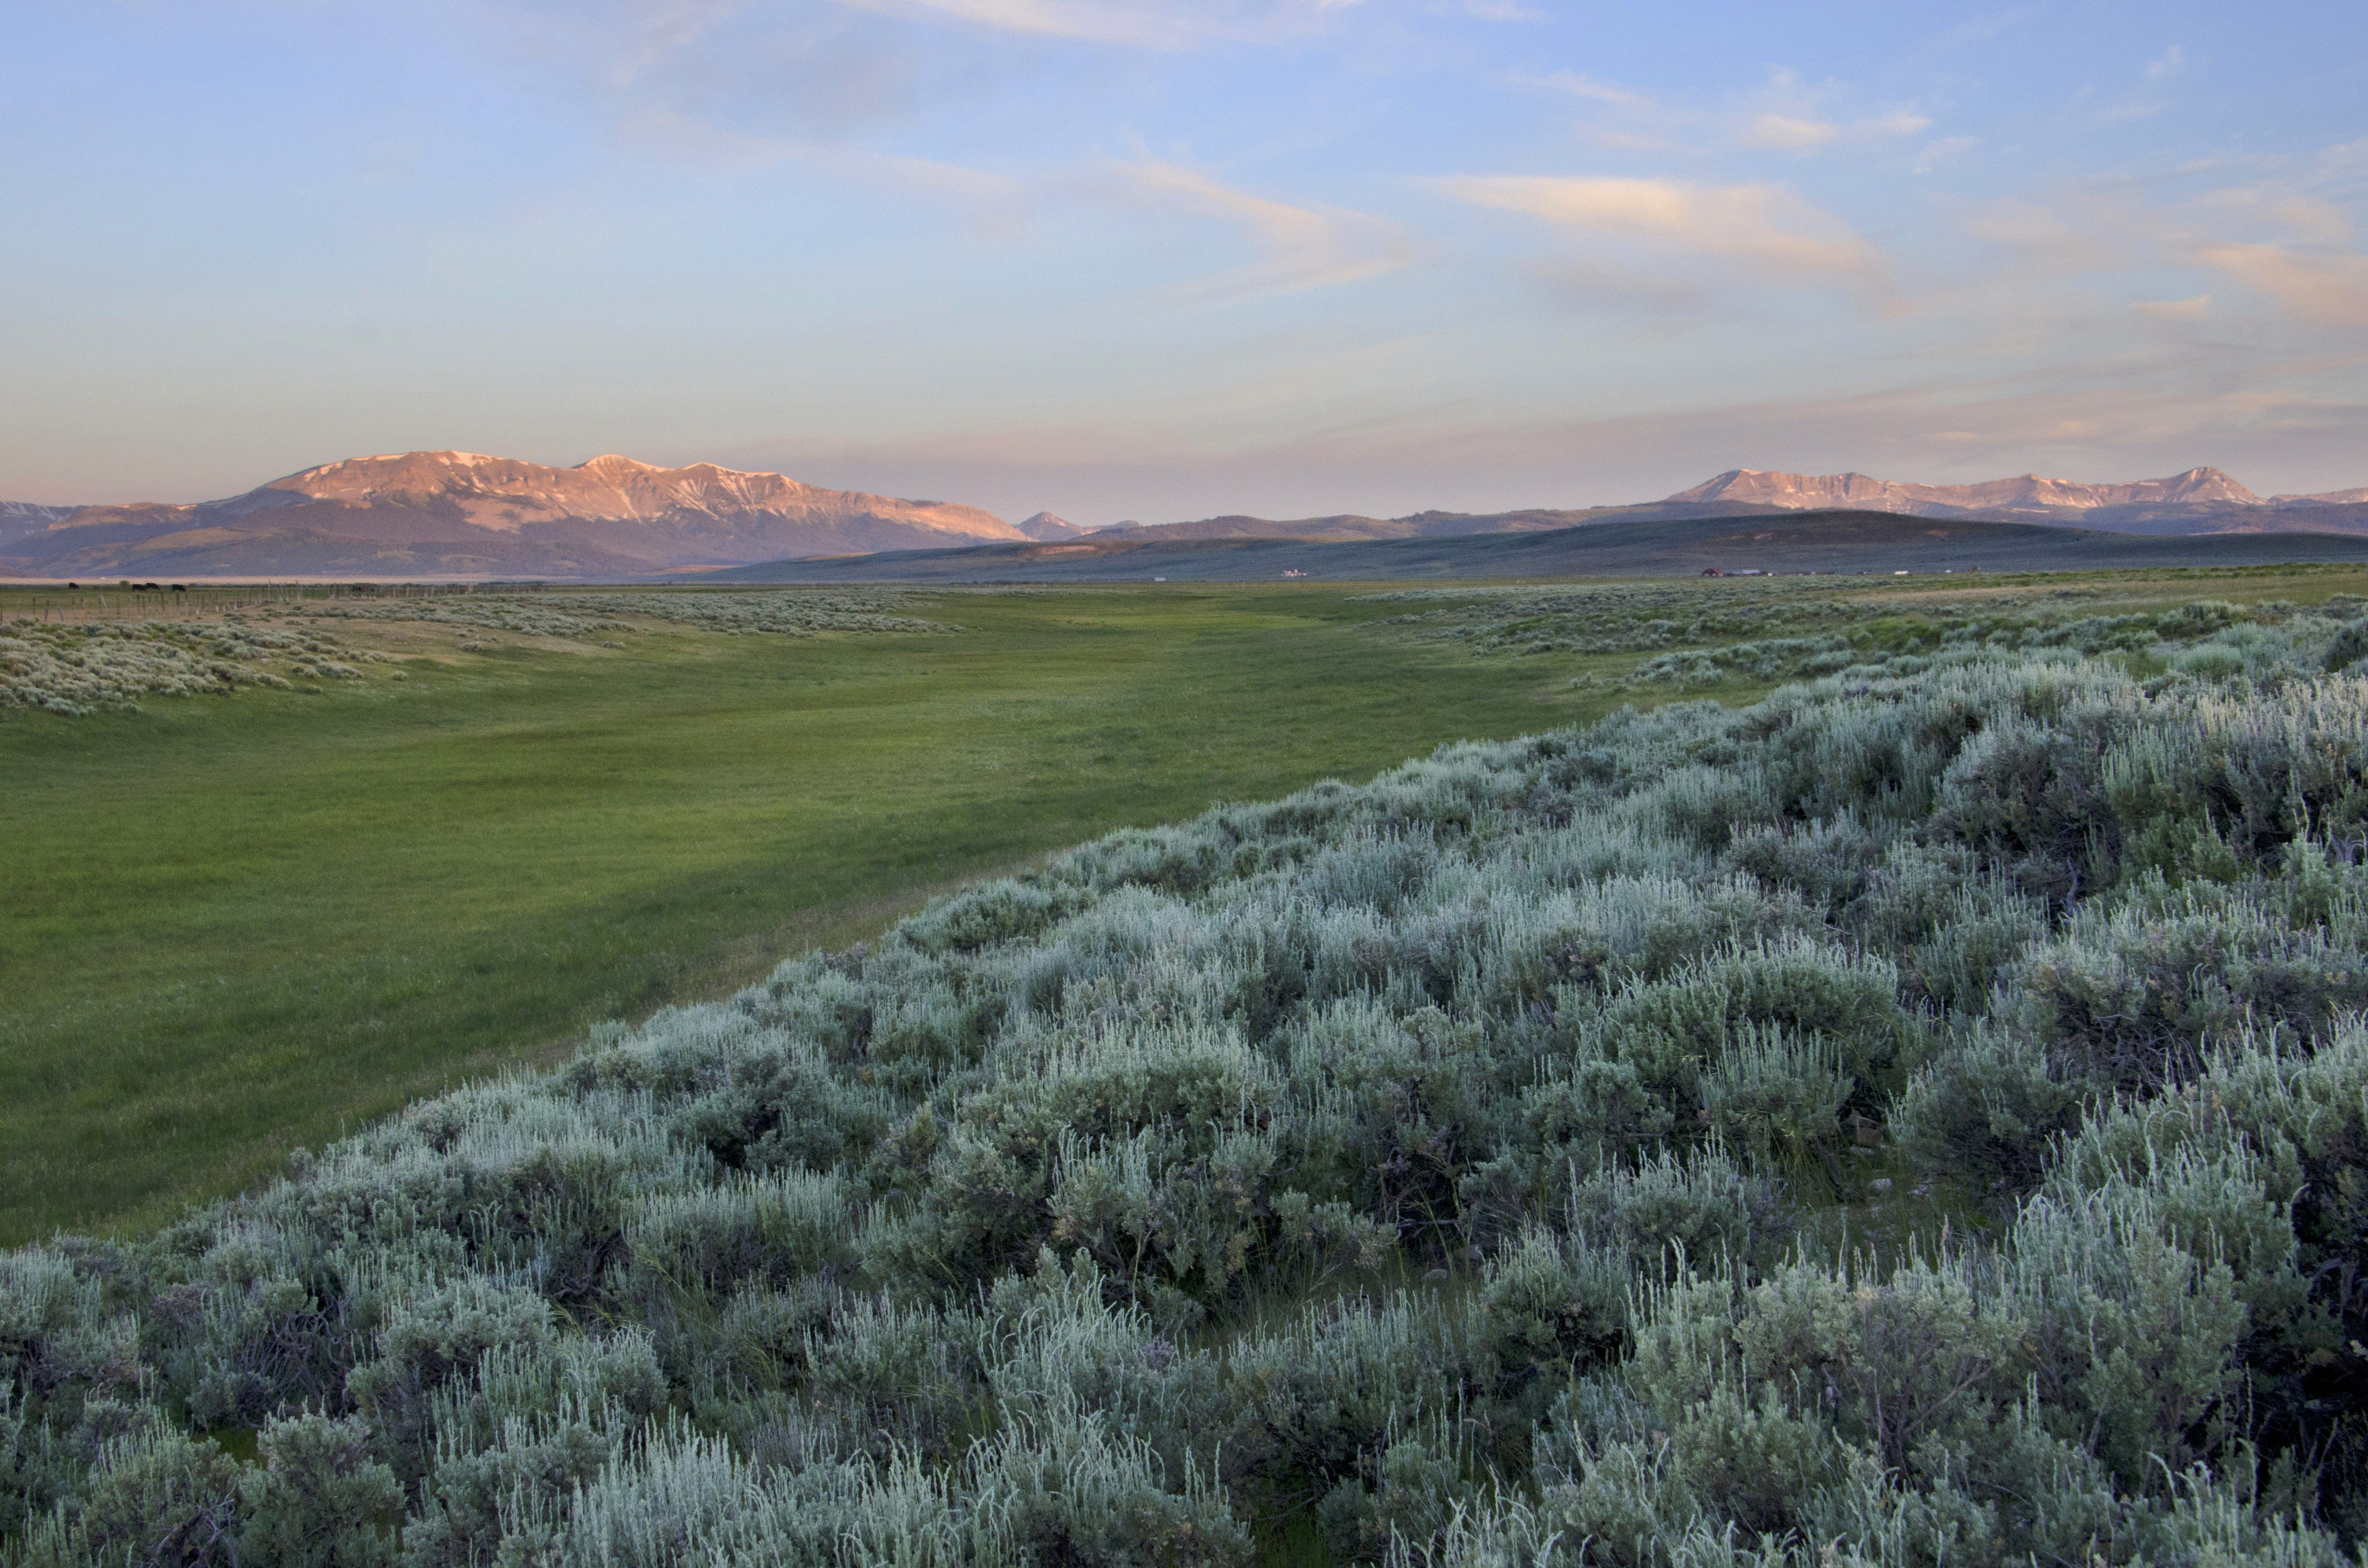 Over 15,000 Acres of Ranchlands Conserved In Sublette County